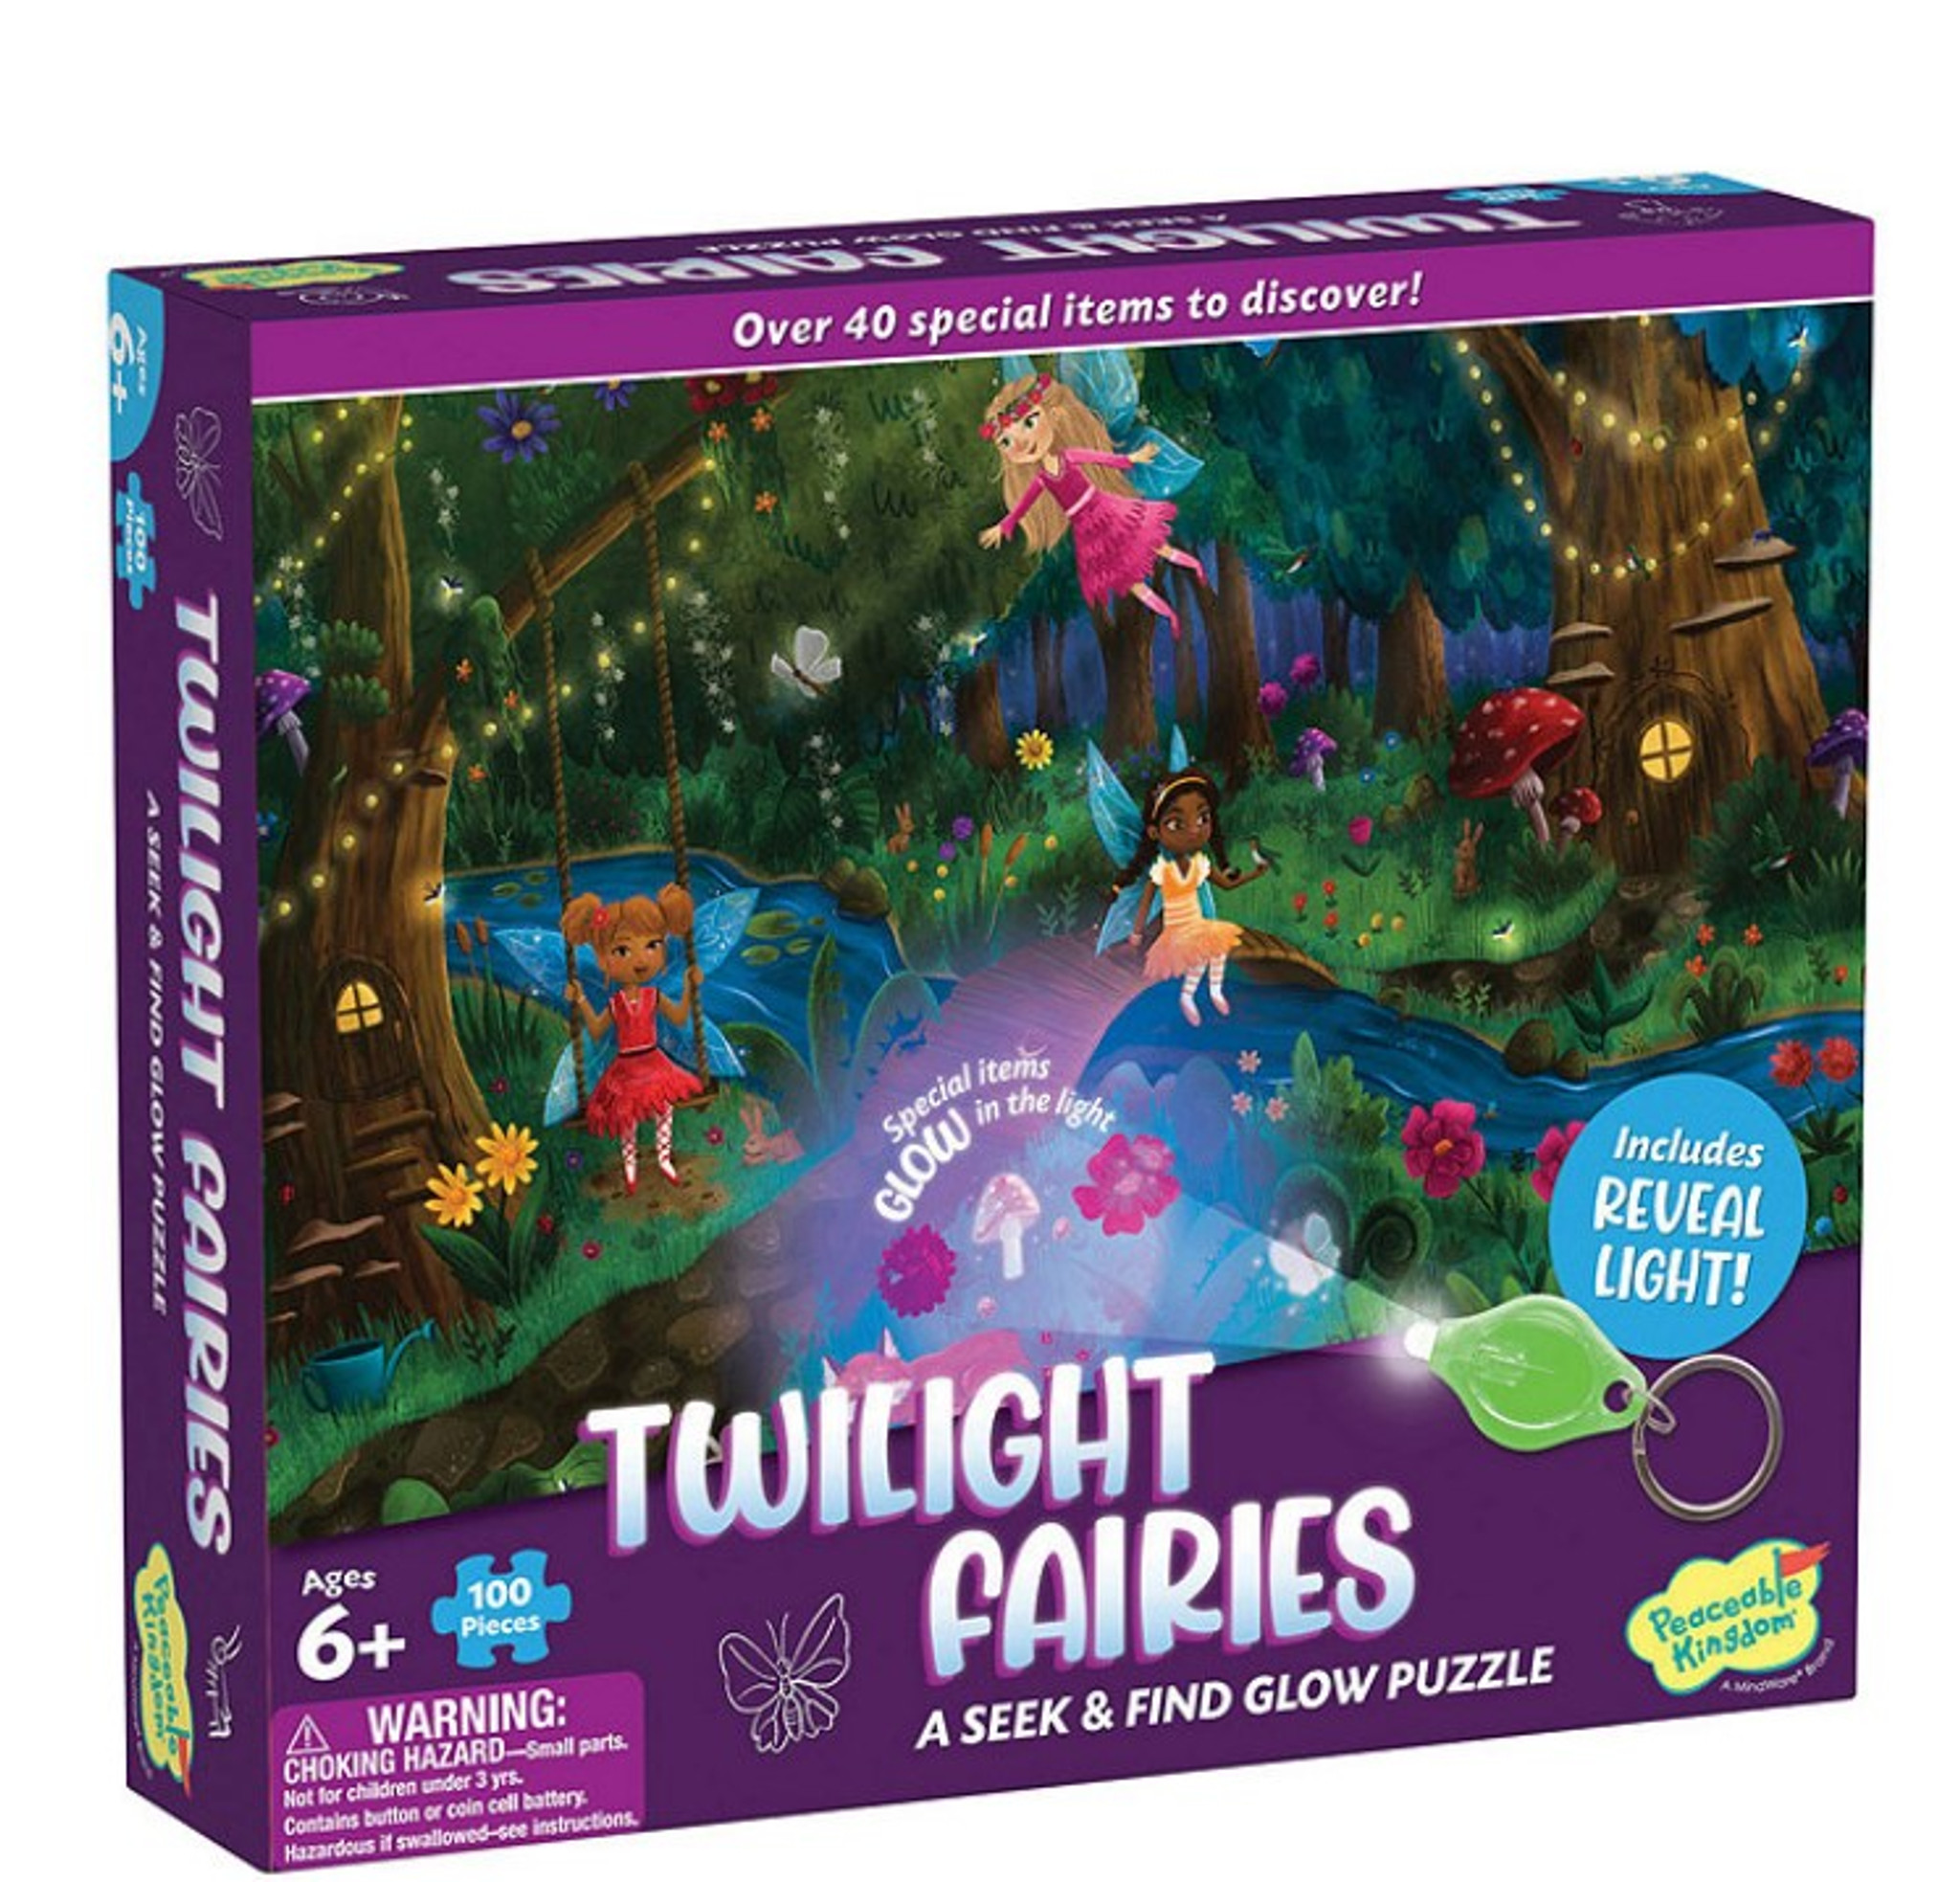 Twilight Fairies Seek and Find Glow Puzzle - 100 Piece - The